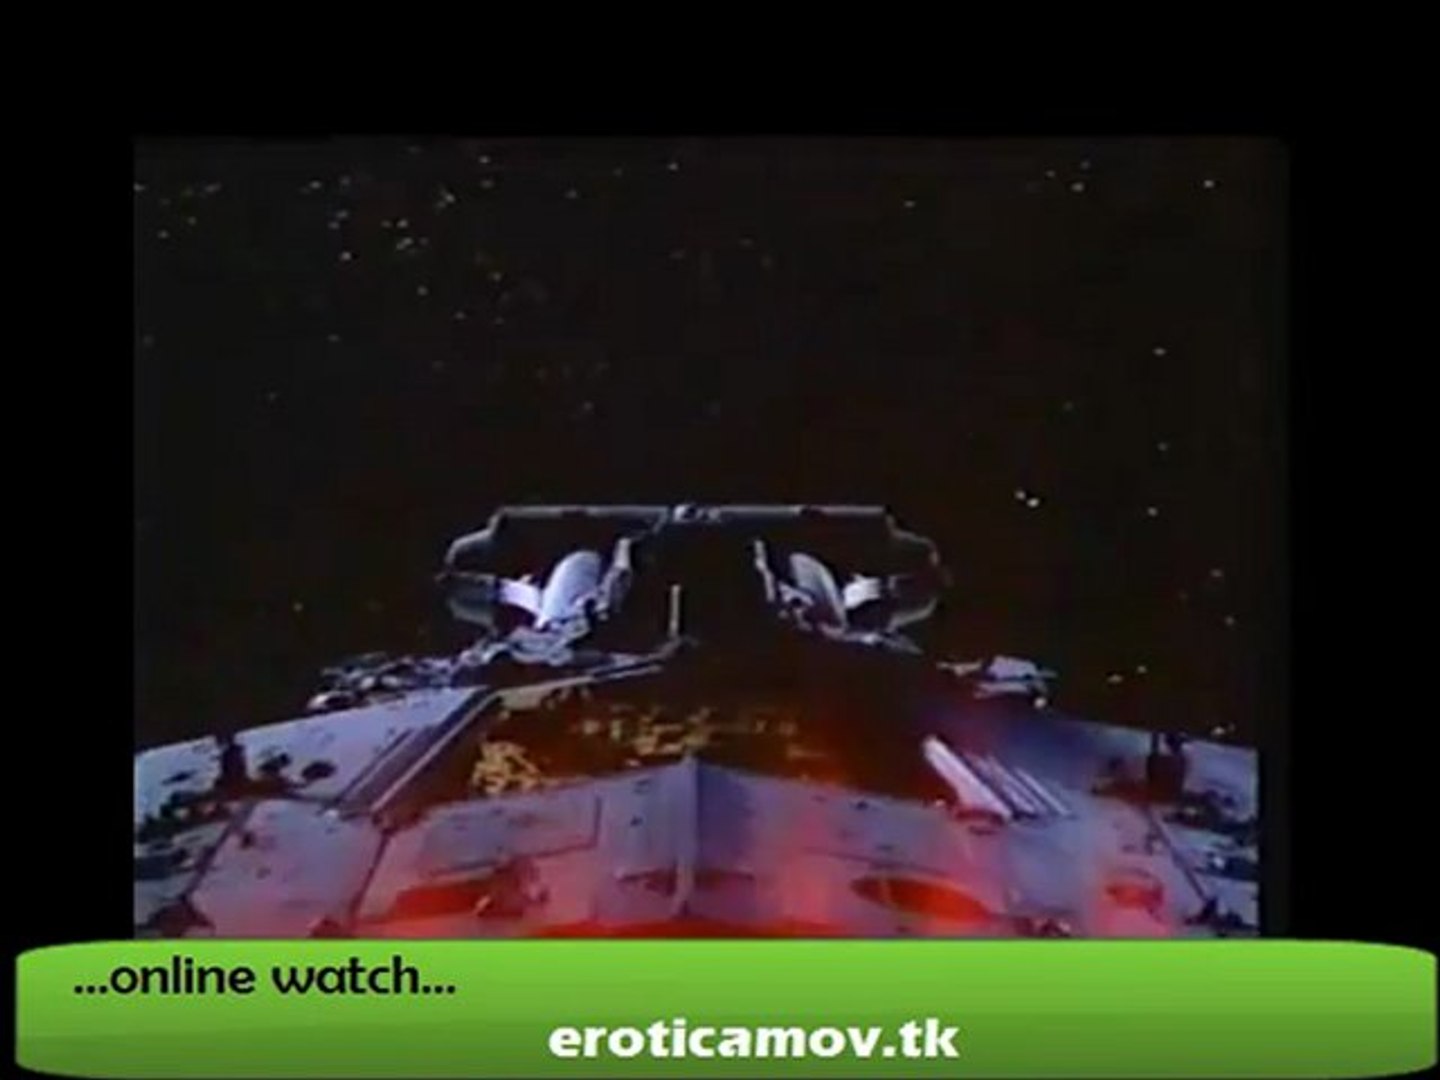 Emanuelle In Space Video